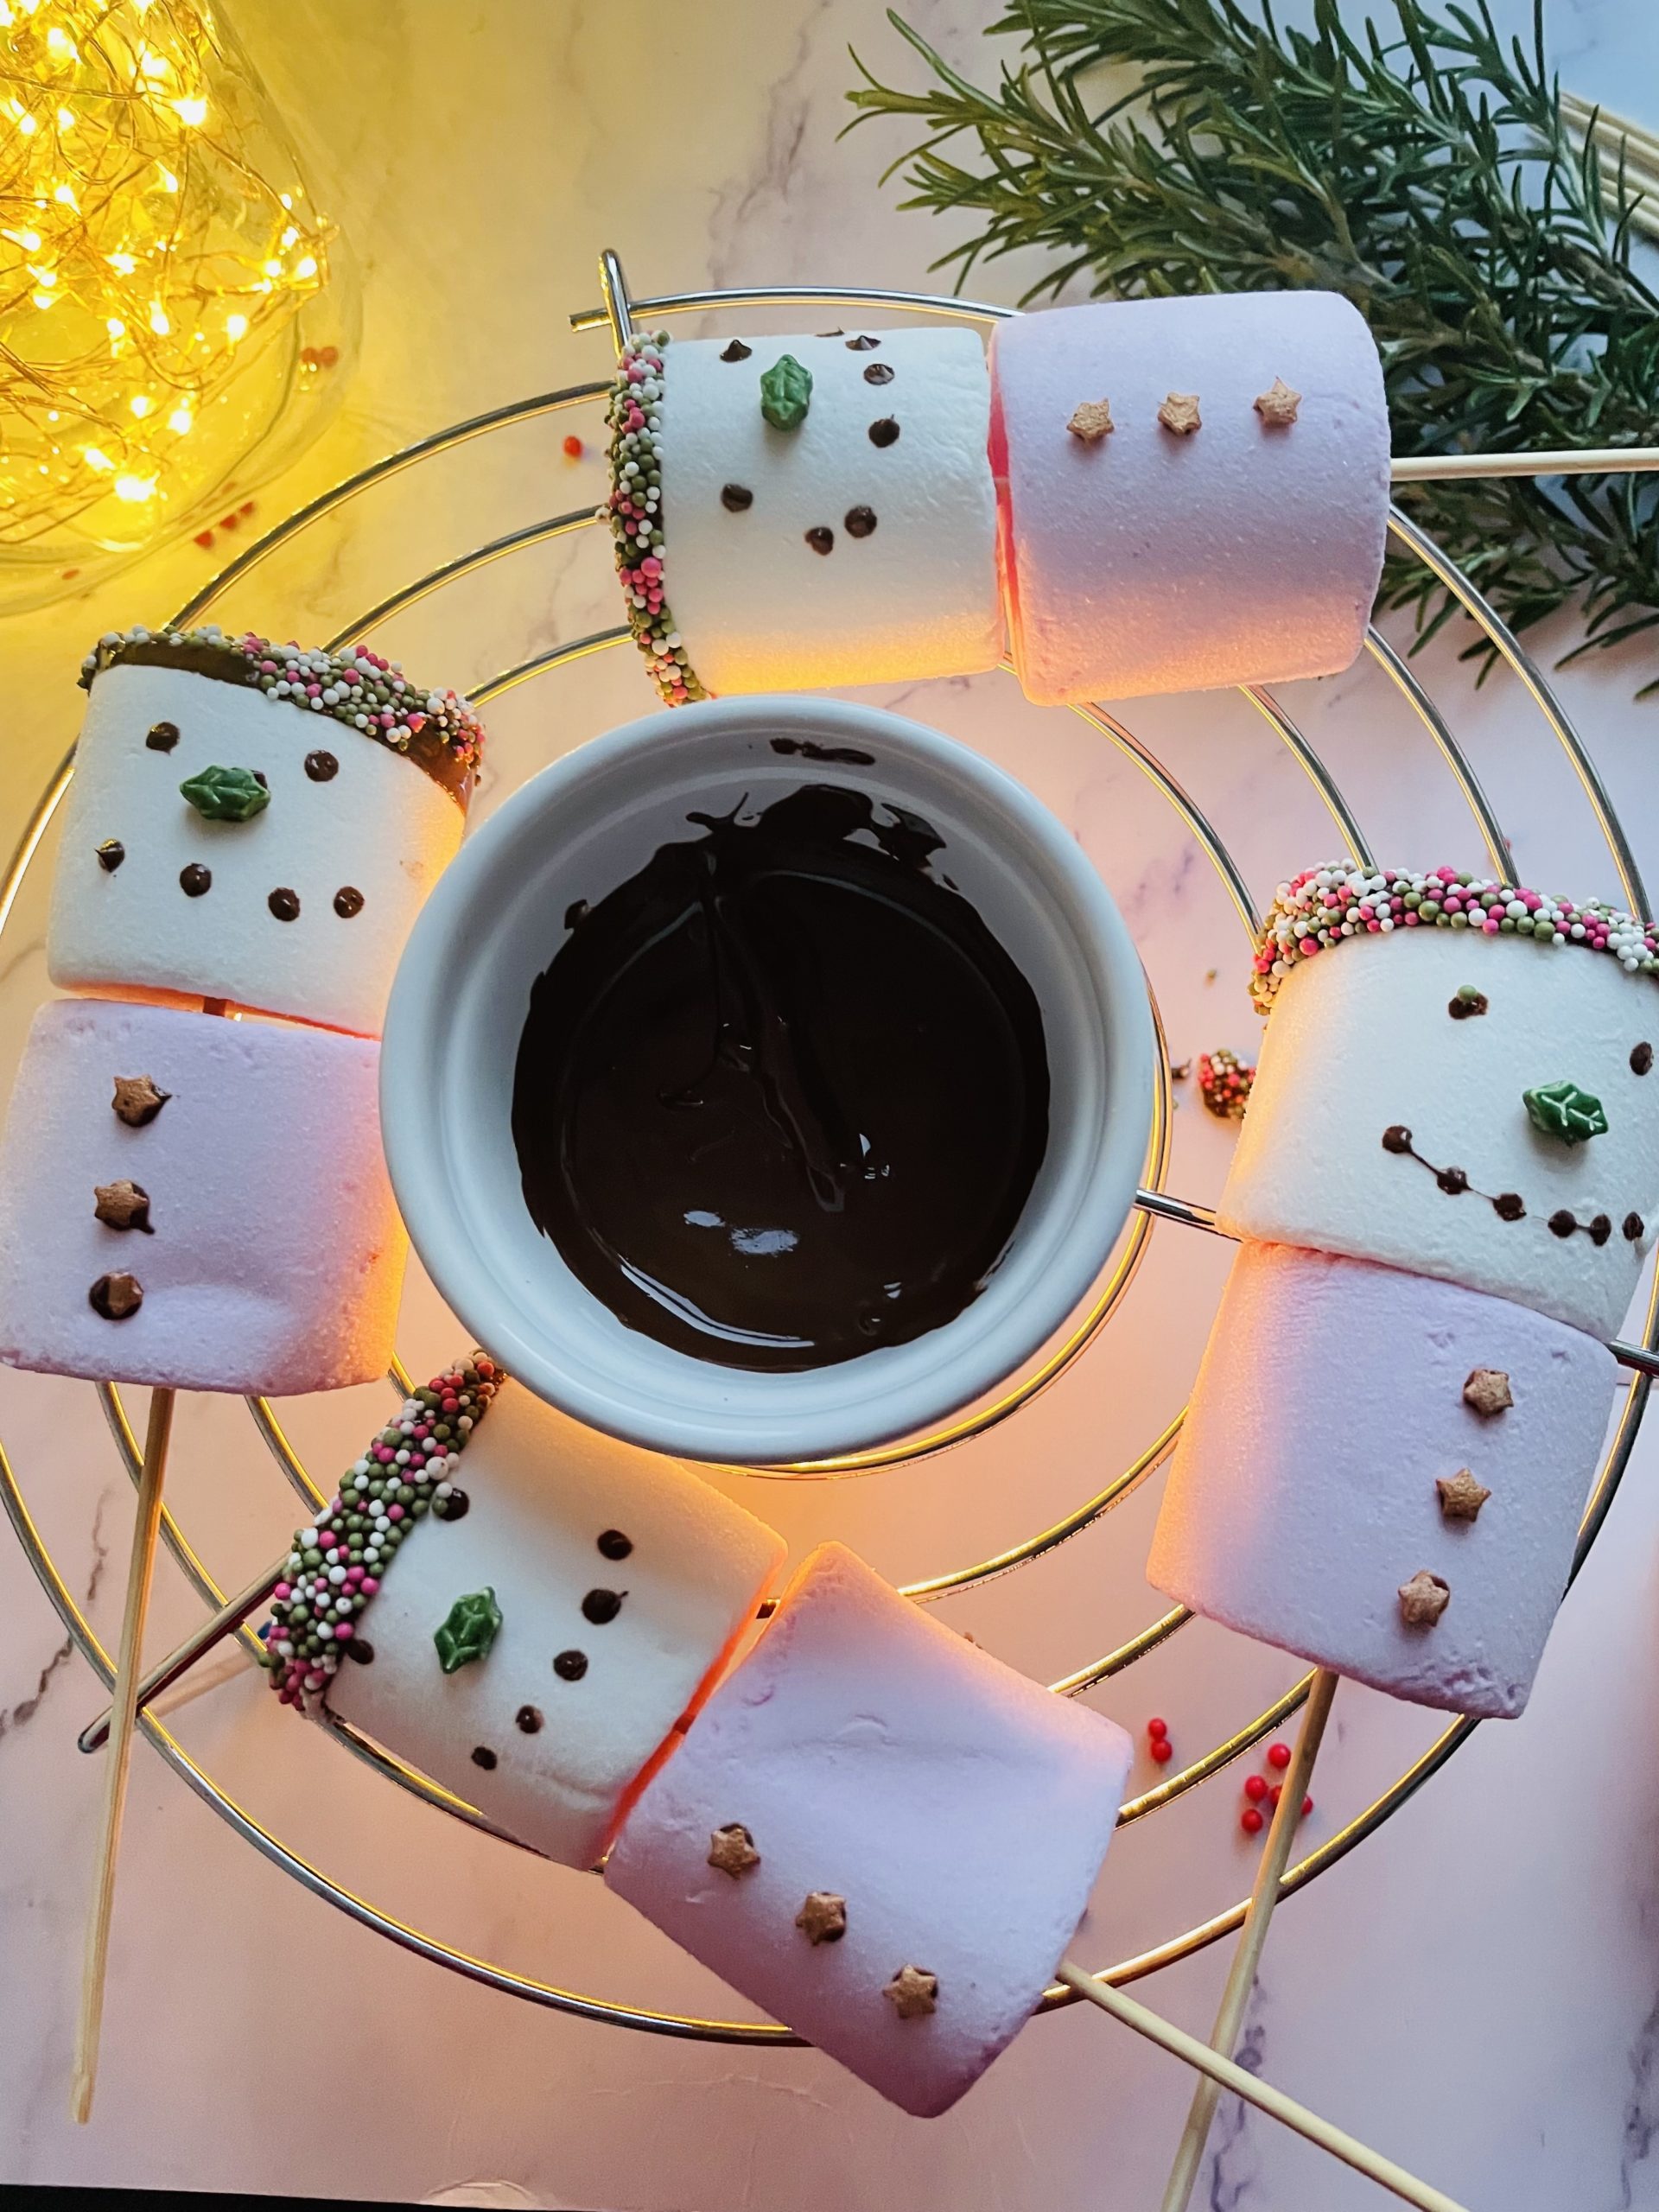 Four snow women marshmallows dipped in melted chocolate and sprinkles